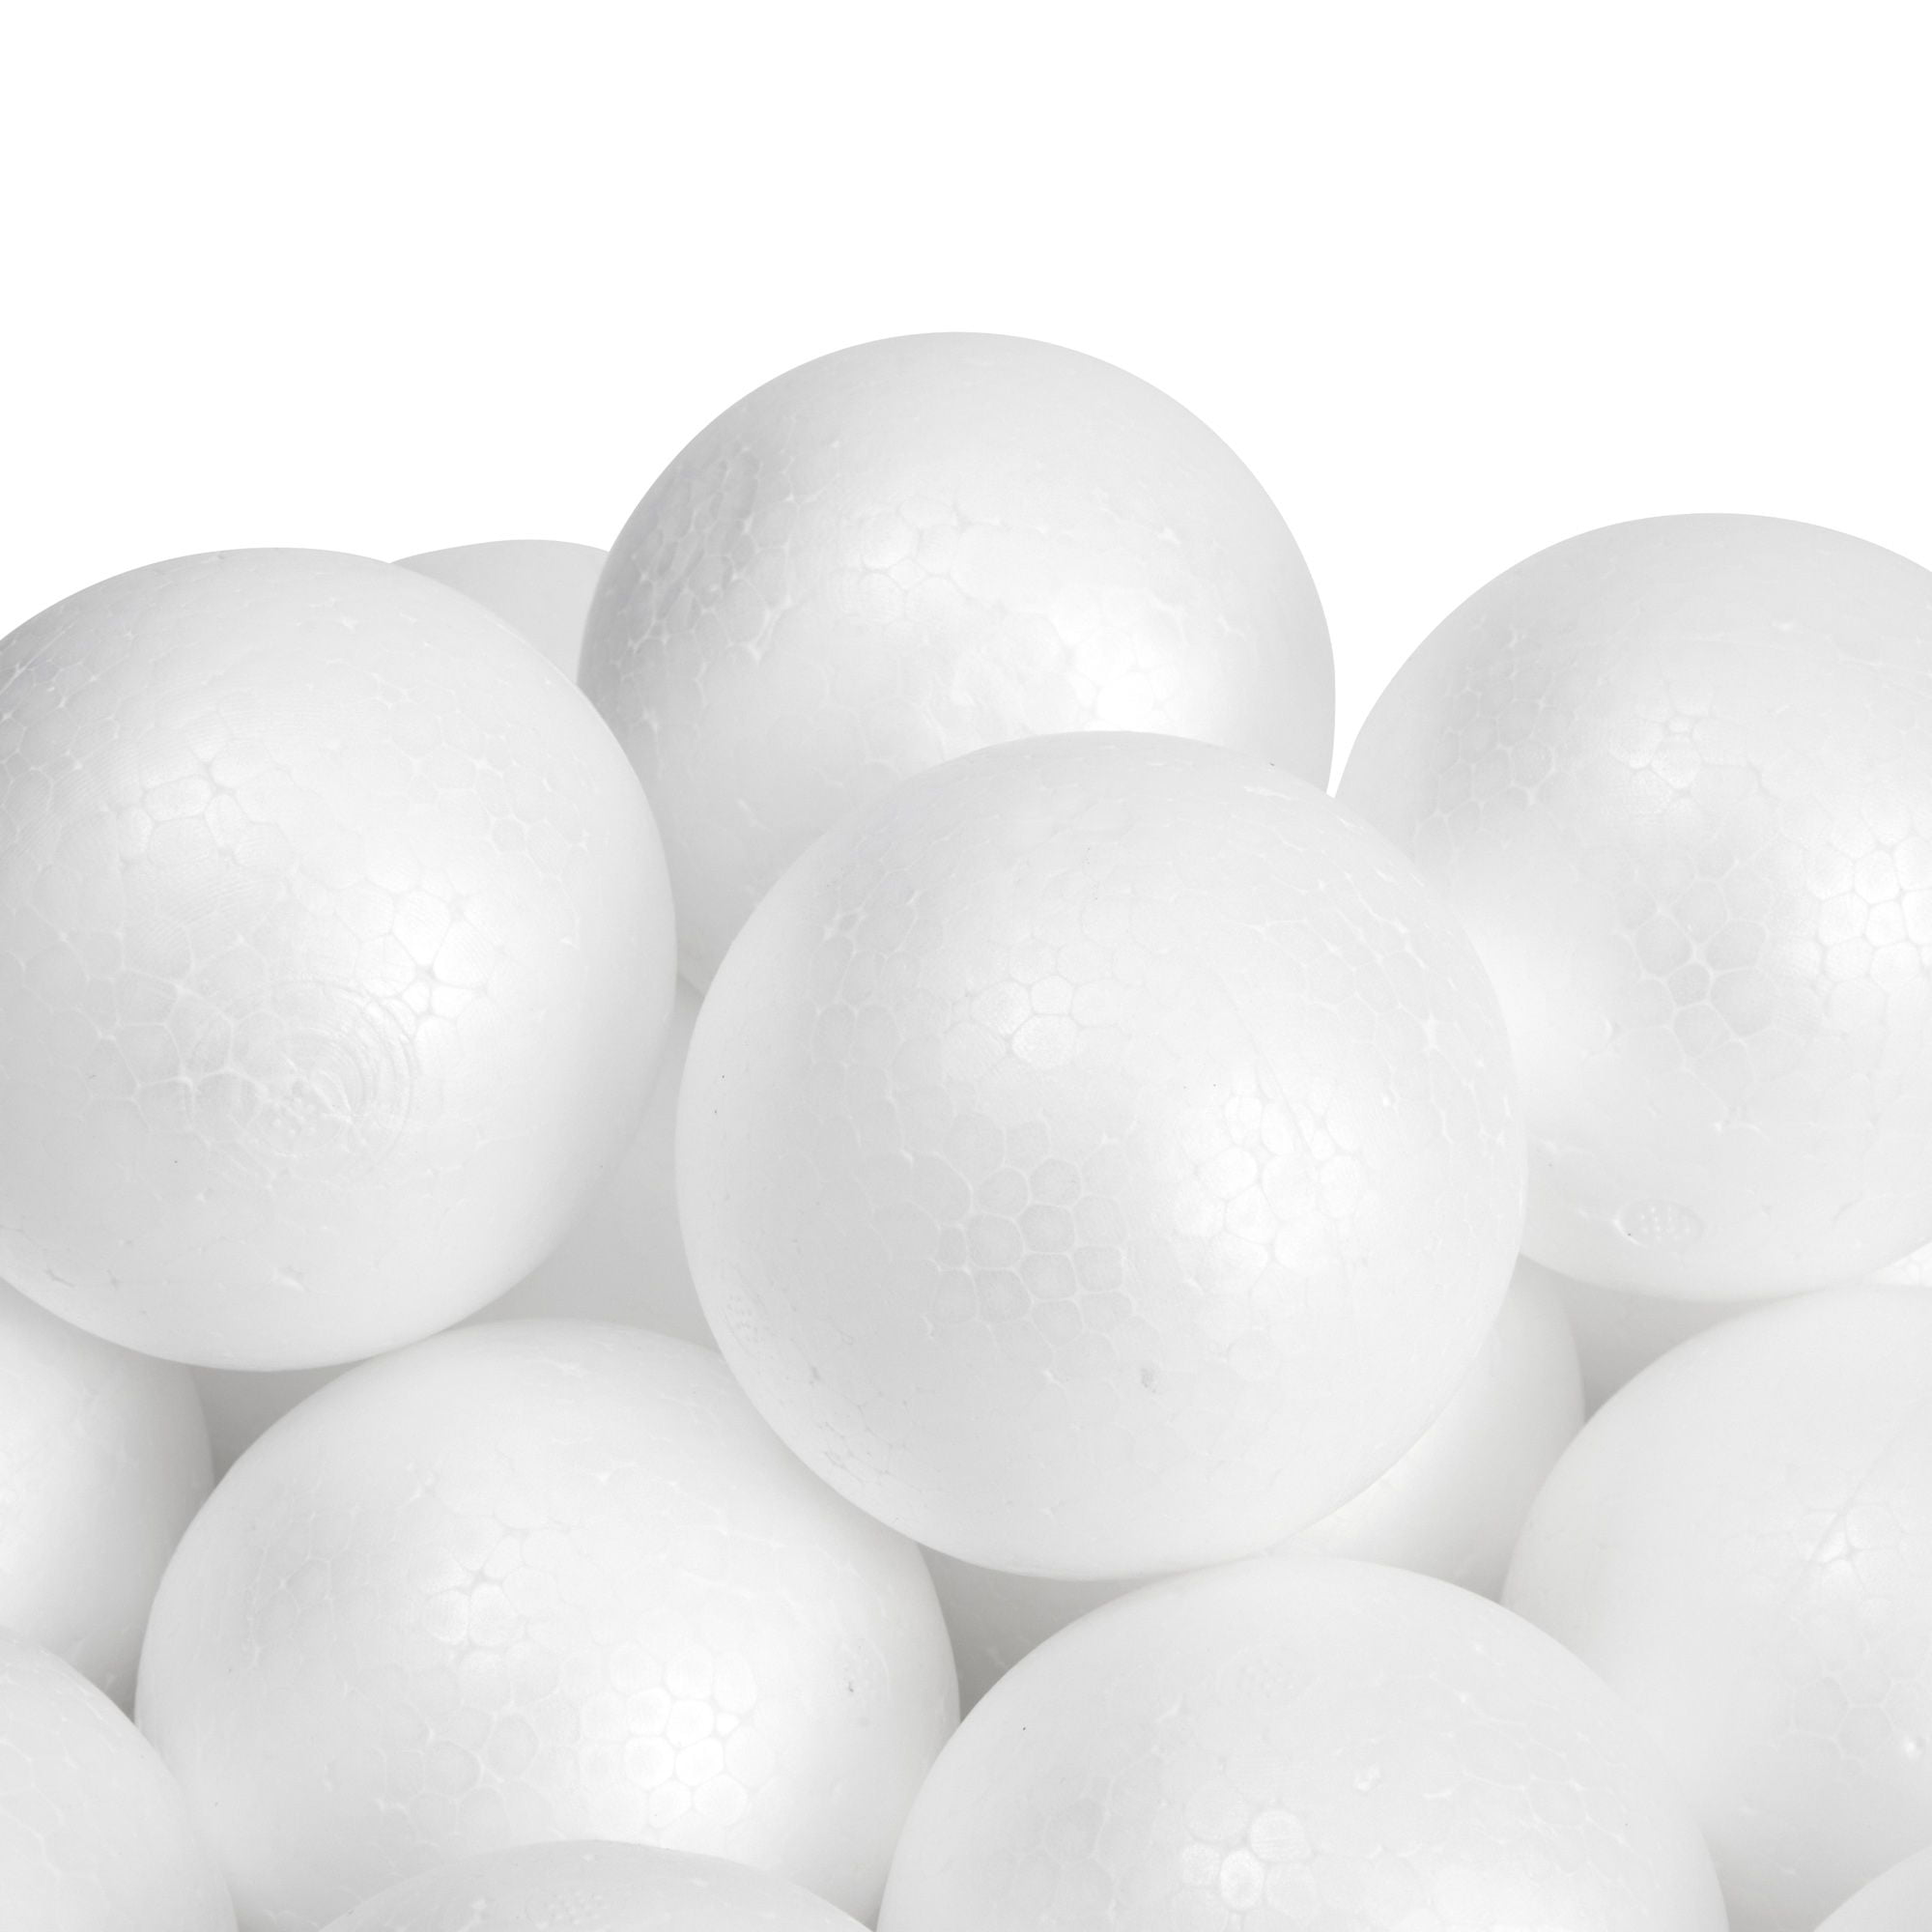 24 Pack 3 Inch Foam Balls for Crafts, Smooth Polystyrene Spheres for DIY  Decorations, Classroom Projects 